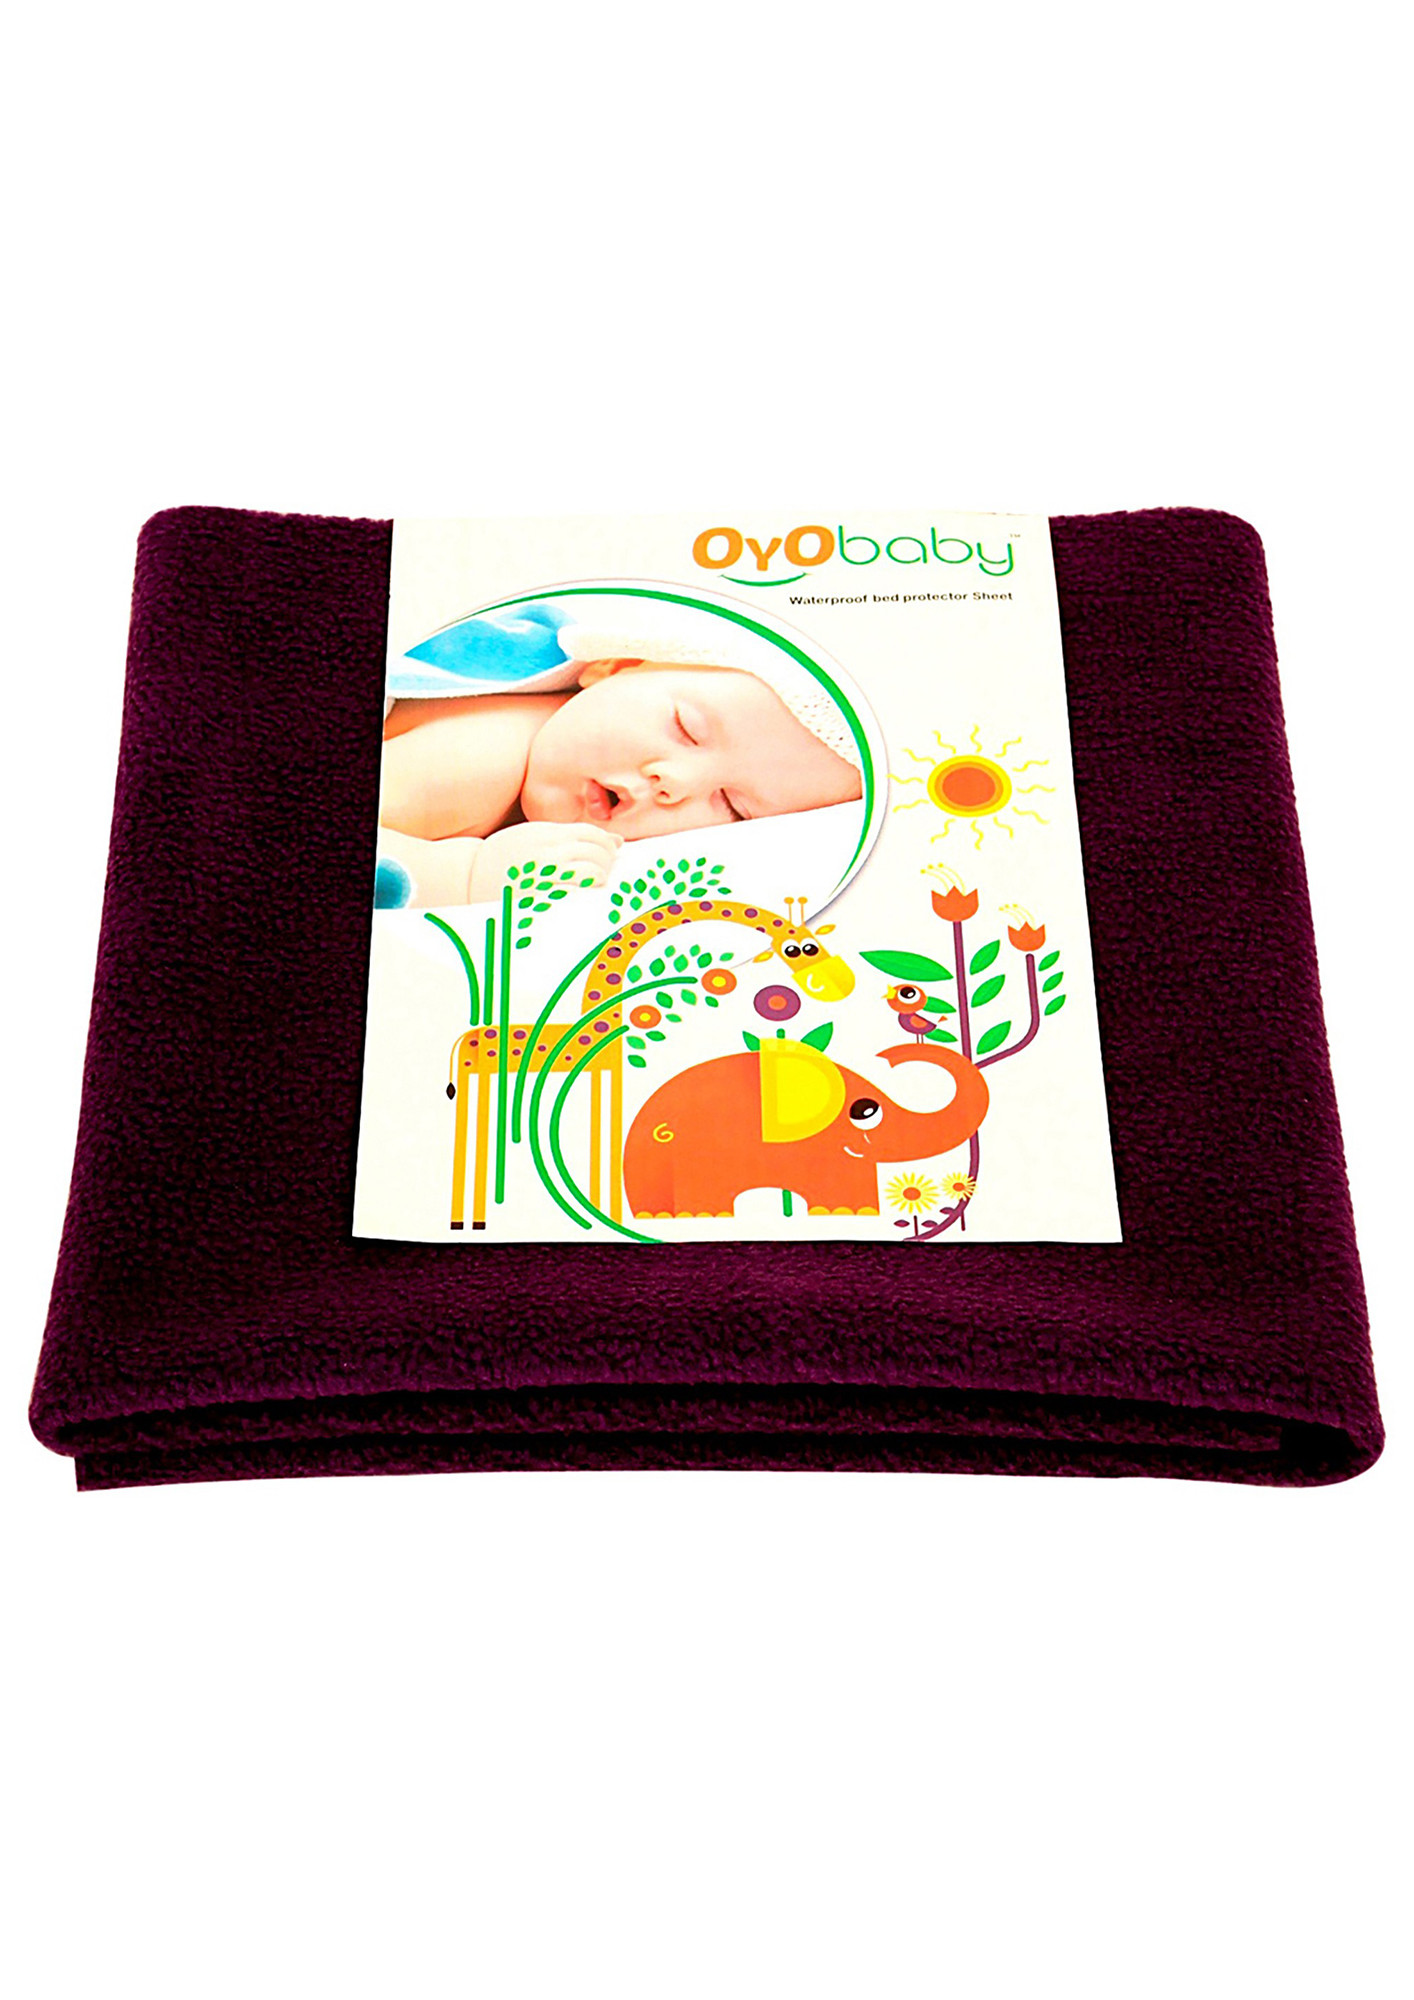 Oyo Baby Cotton Baby Bed Protecting Mat (Plum, Small)-OB-2020-PL